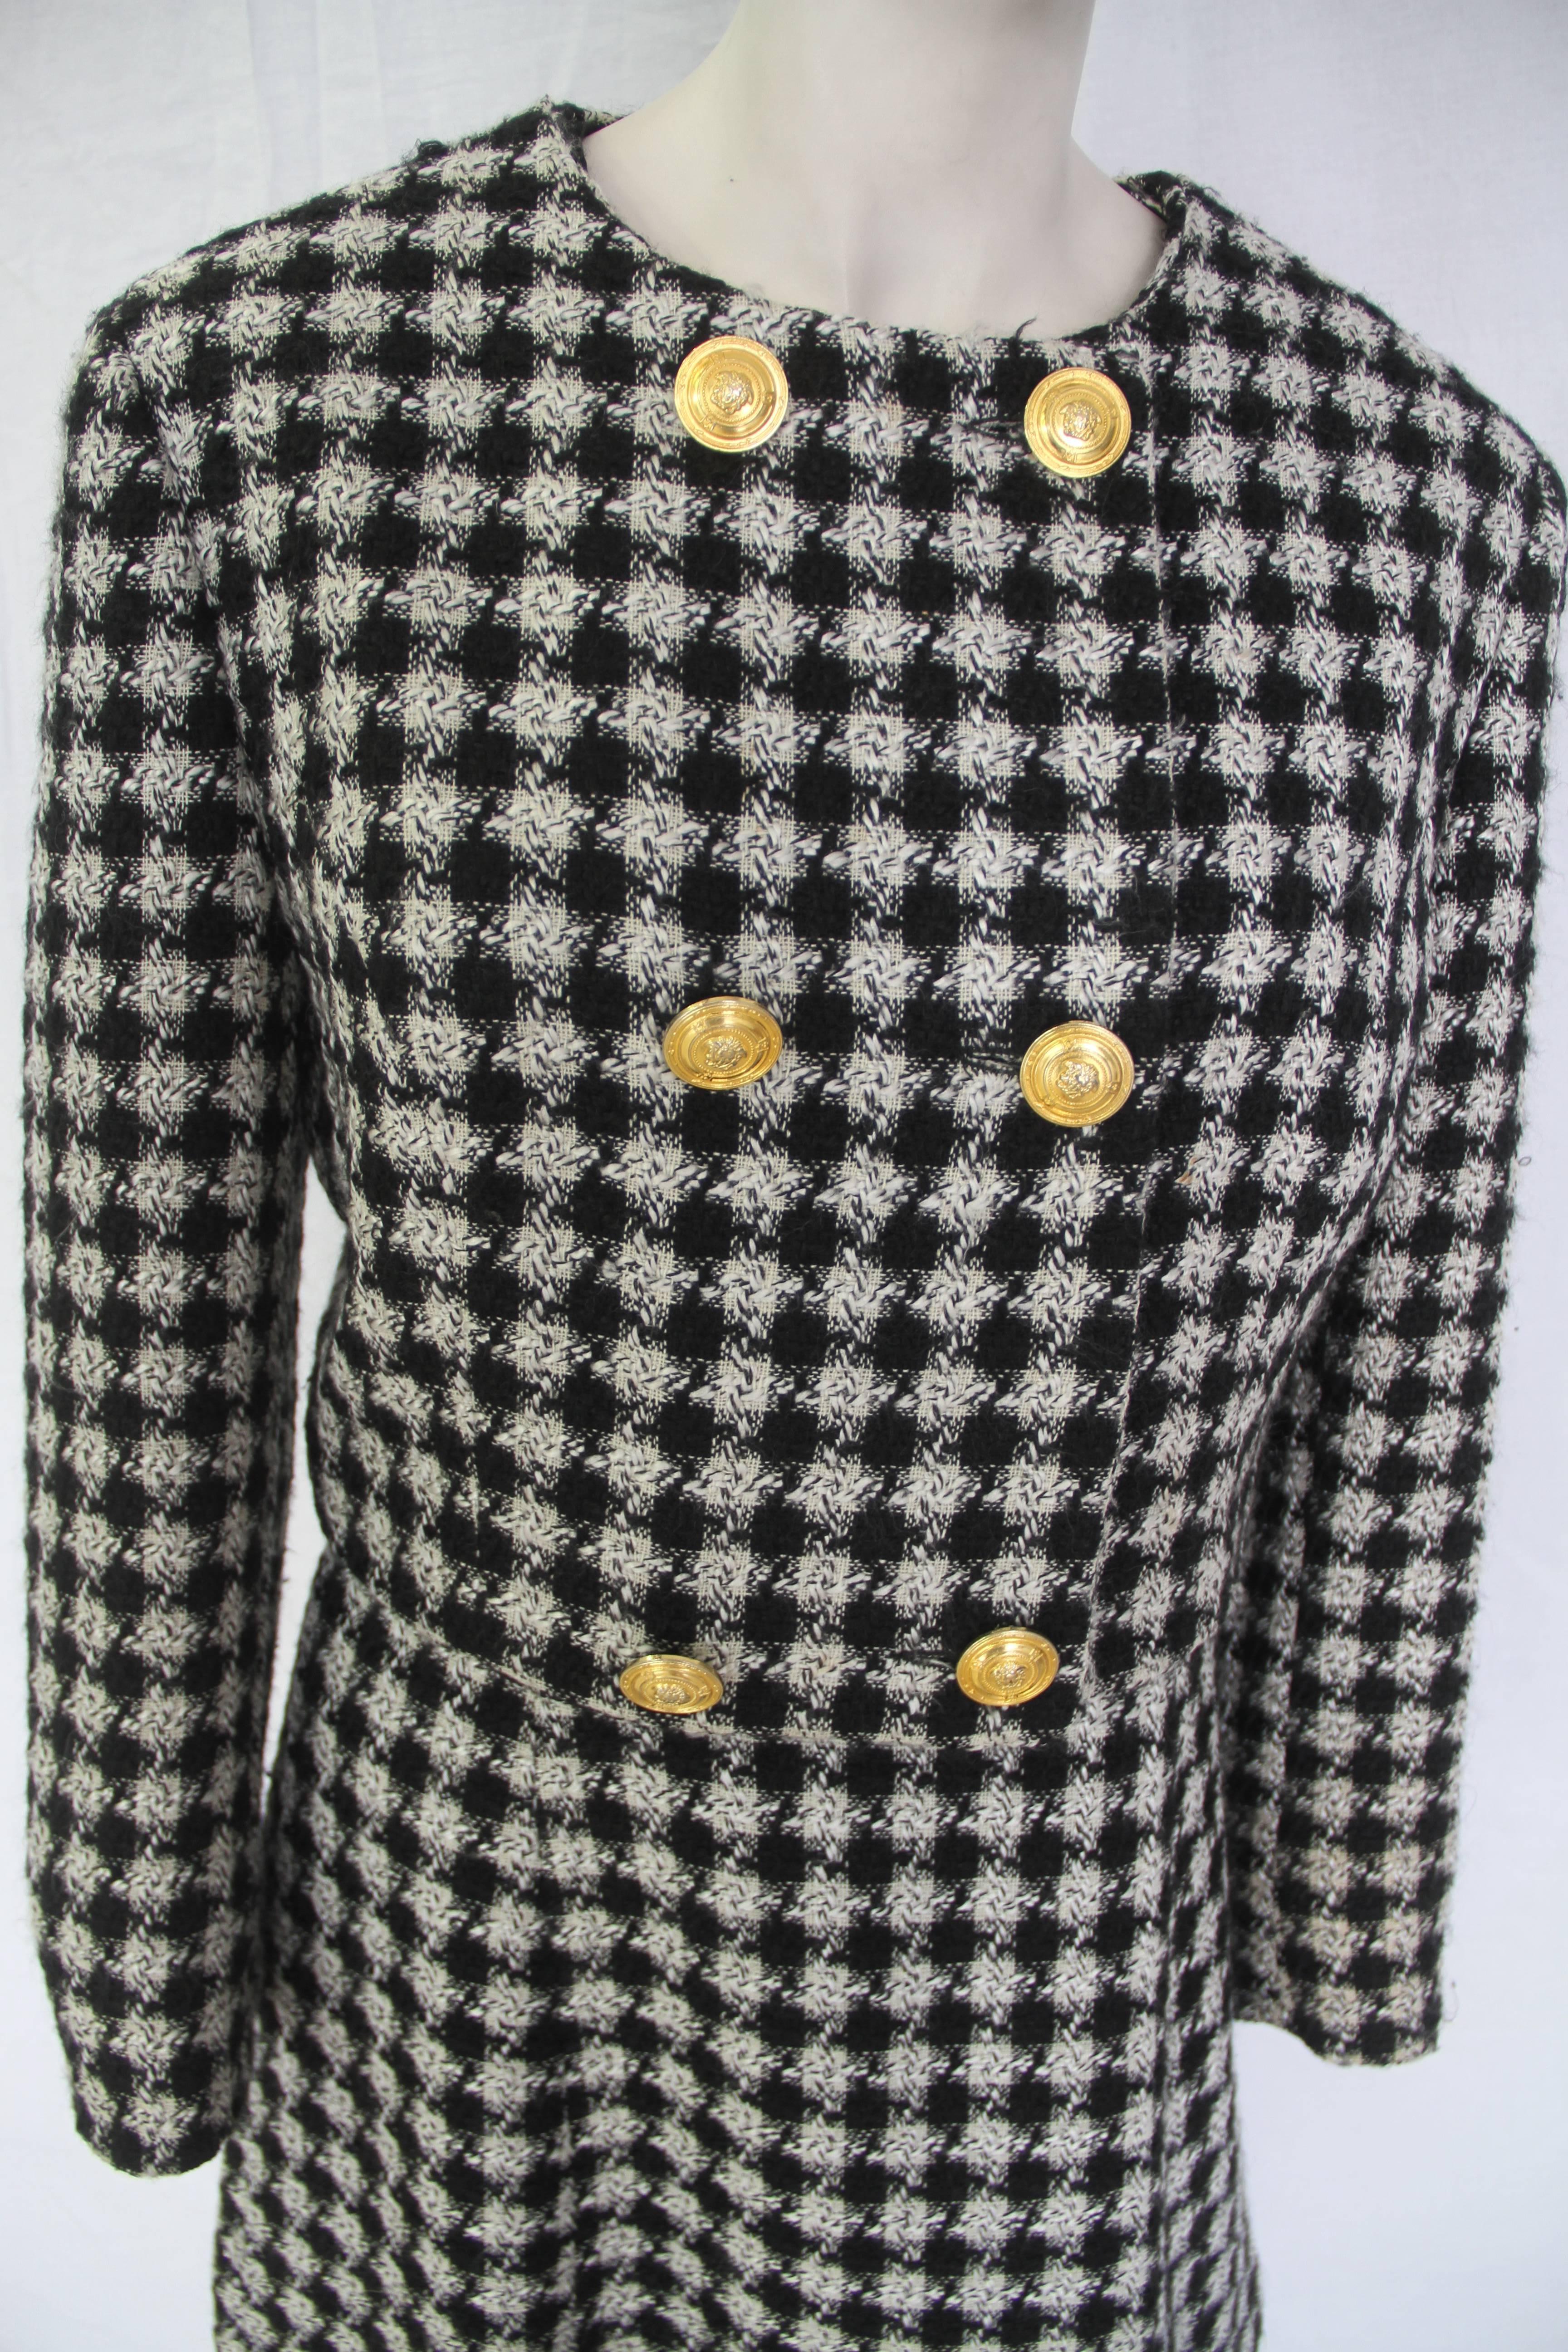 Gianni Versace black and white checked sleeveless dress, with matching cropped jacket,from the Fall 1992 Versace Jeans Couture collection.

Marked an Italian size 42.

Manufacturer - Ittierre S.p.a.